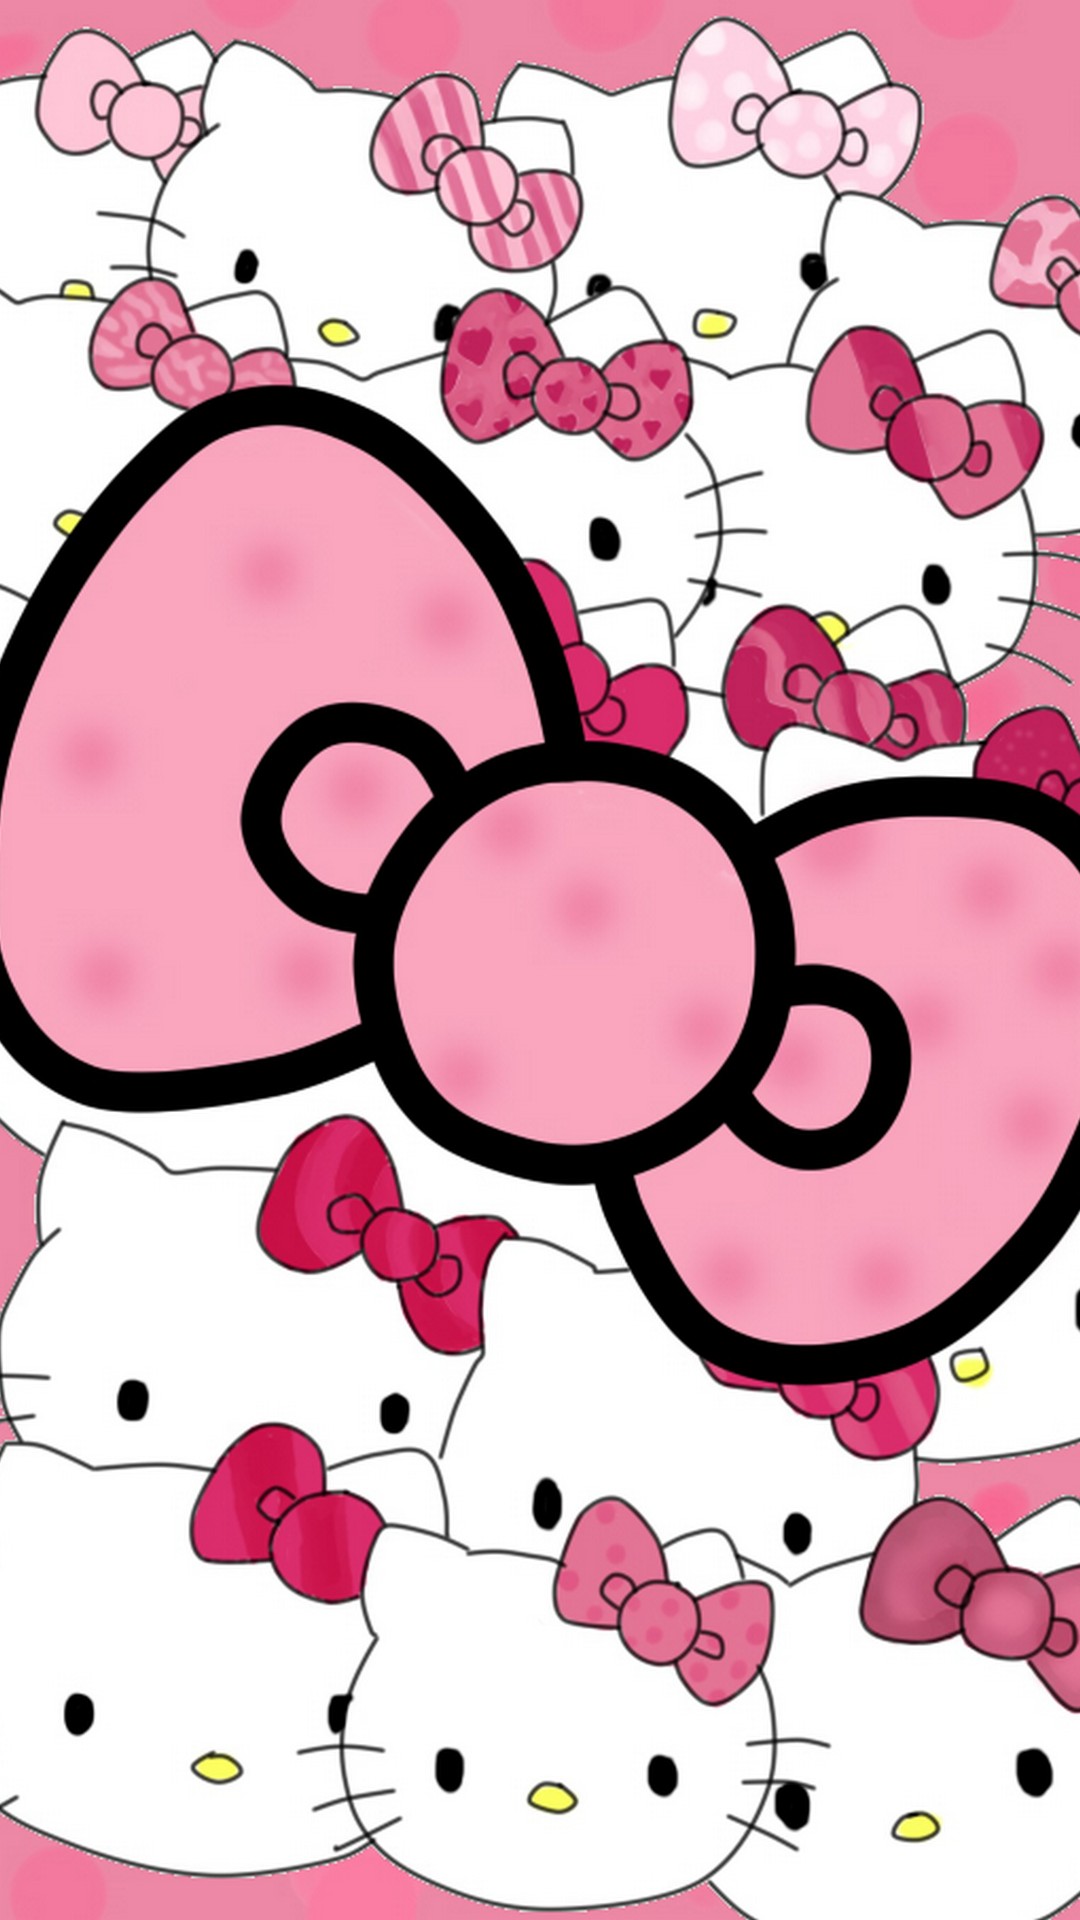 Sanrio Hello Kitty Wallpaper For Android with resolution 1080X1920 pixel. You can make this wallpaper for your Android backgrounds, Tablet, Smartphones Screensavers and Mobile Phone Lock Screen